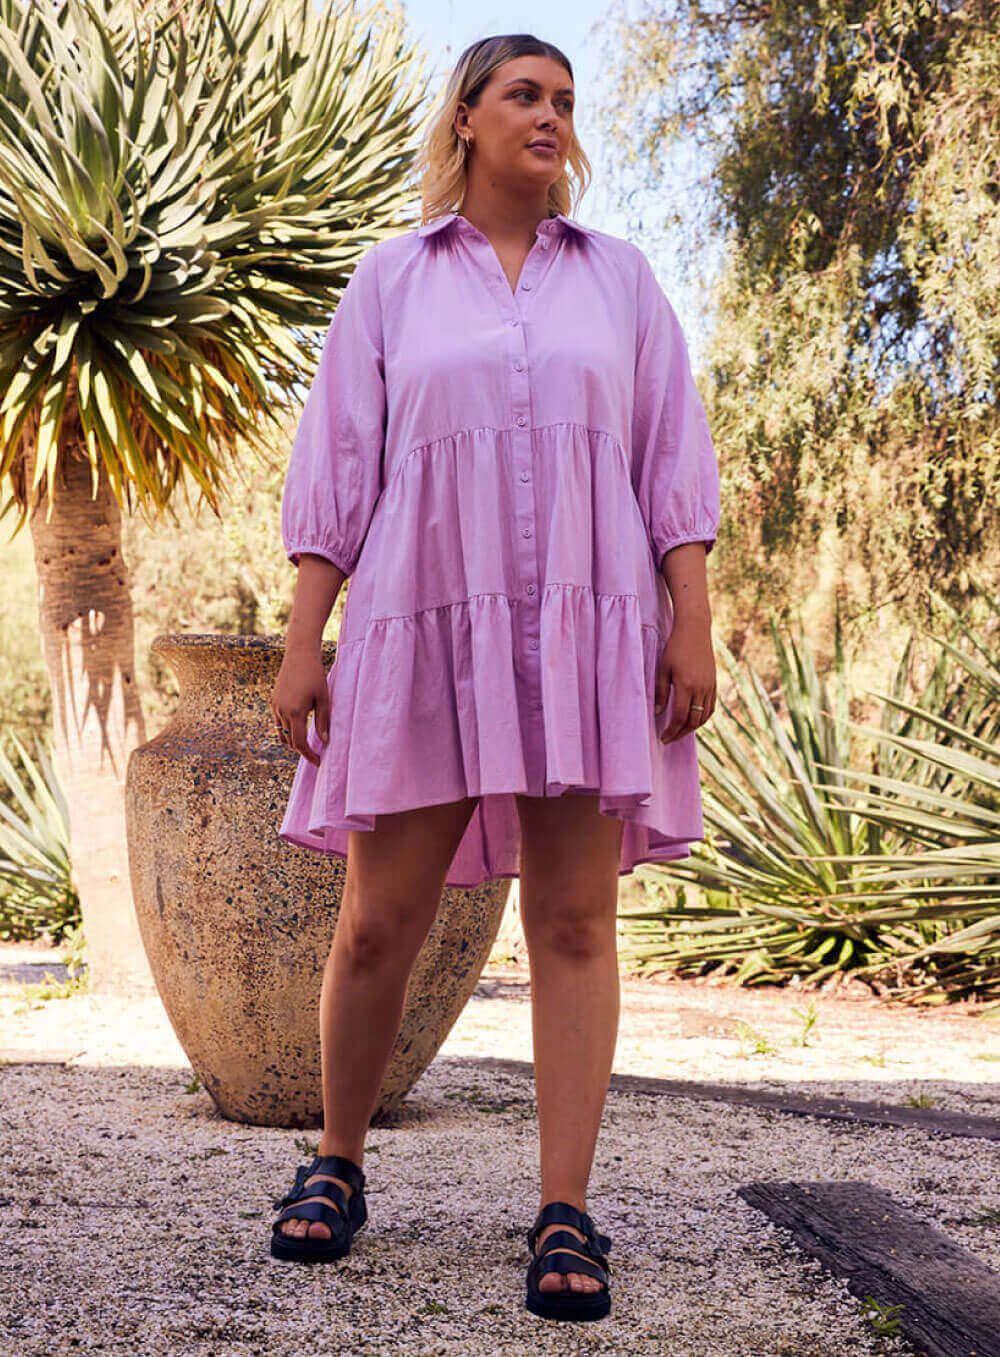 The Jasmine dress is an oversize, mini length lilac colour dress with 2 tiers and a 3/4 sleeve with elastic cuff